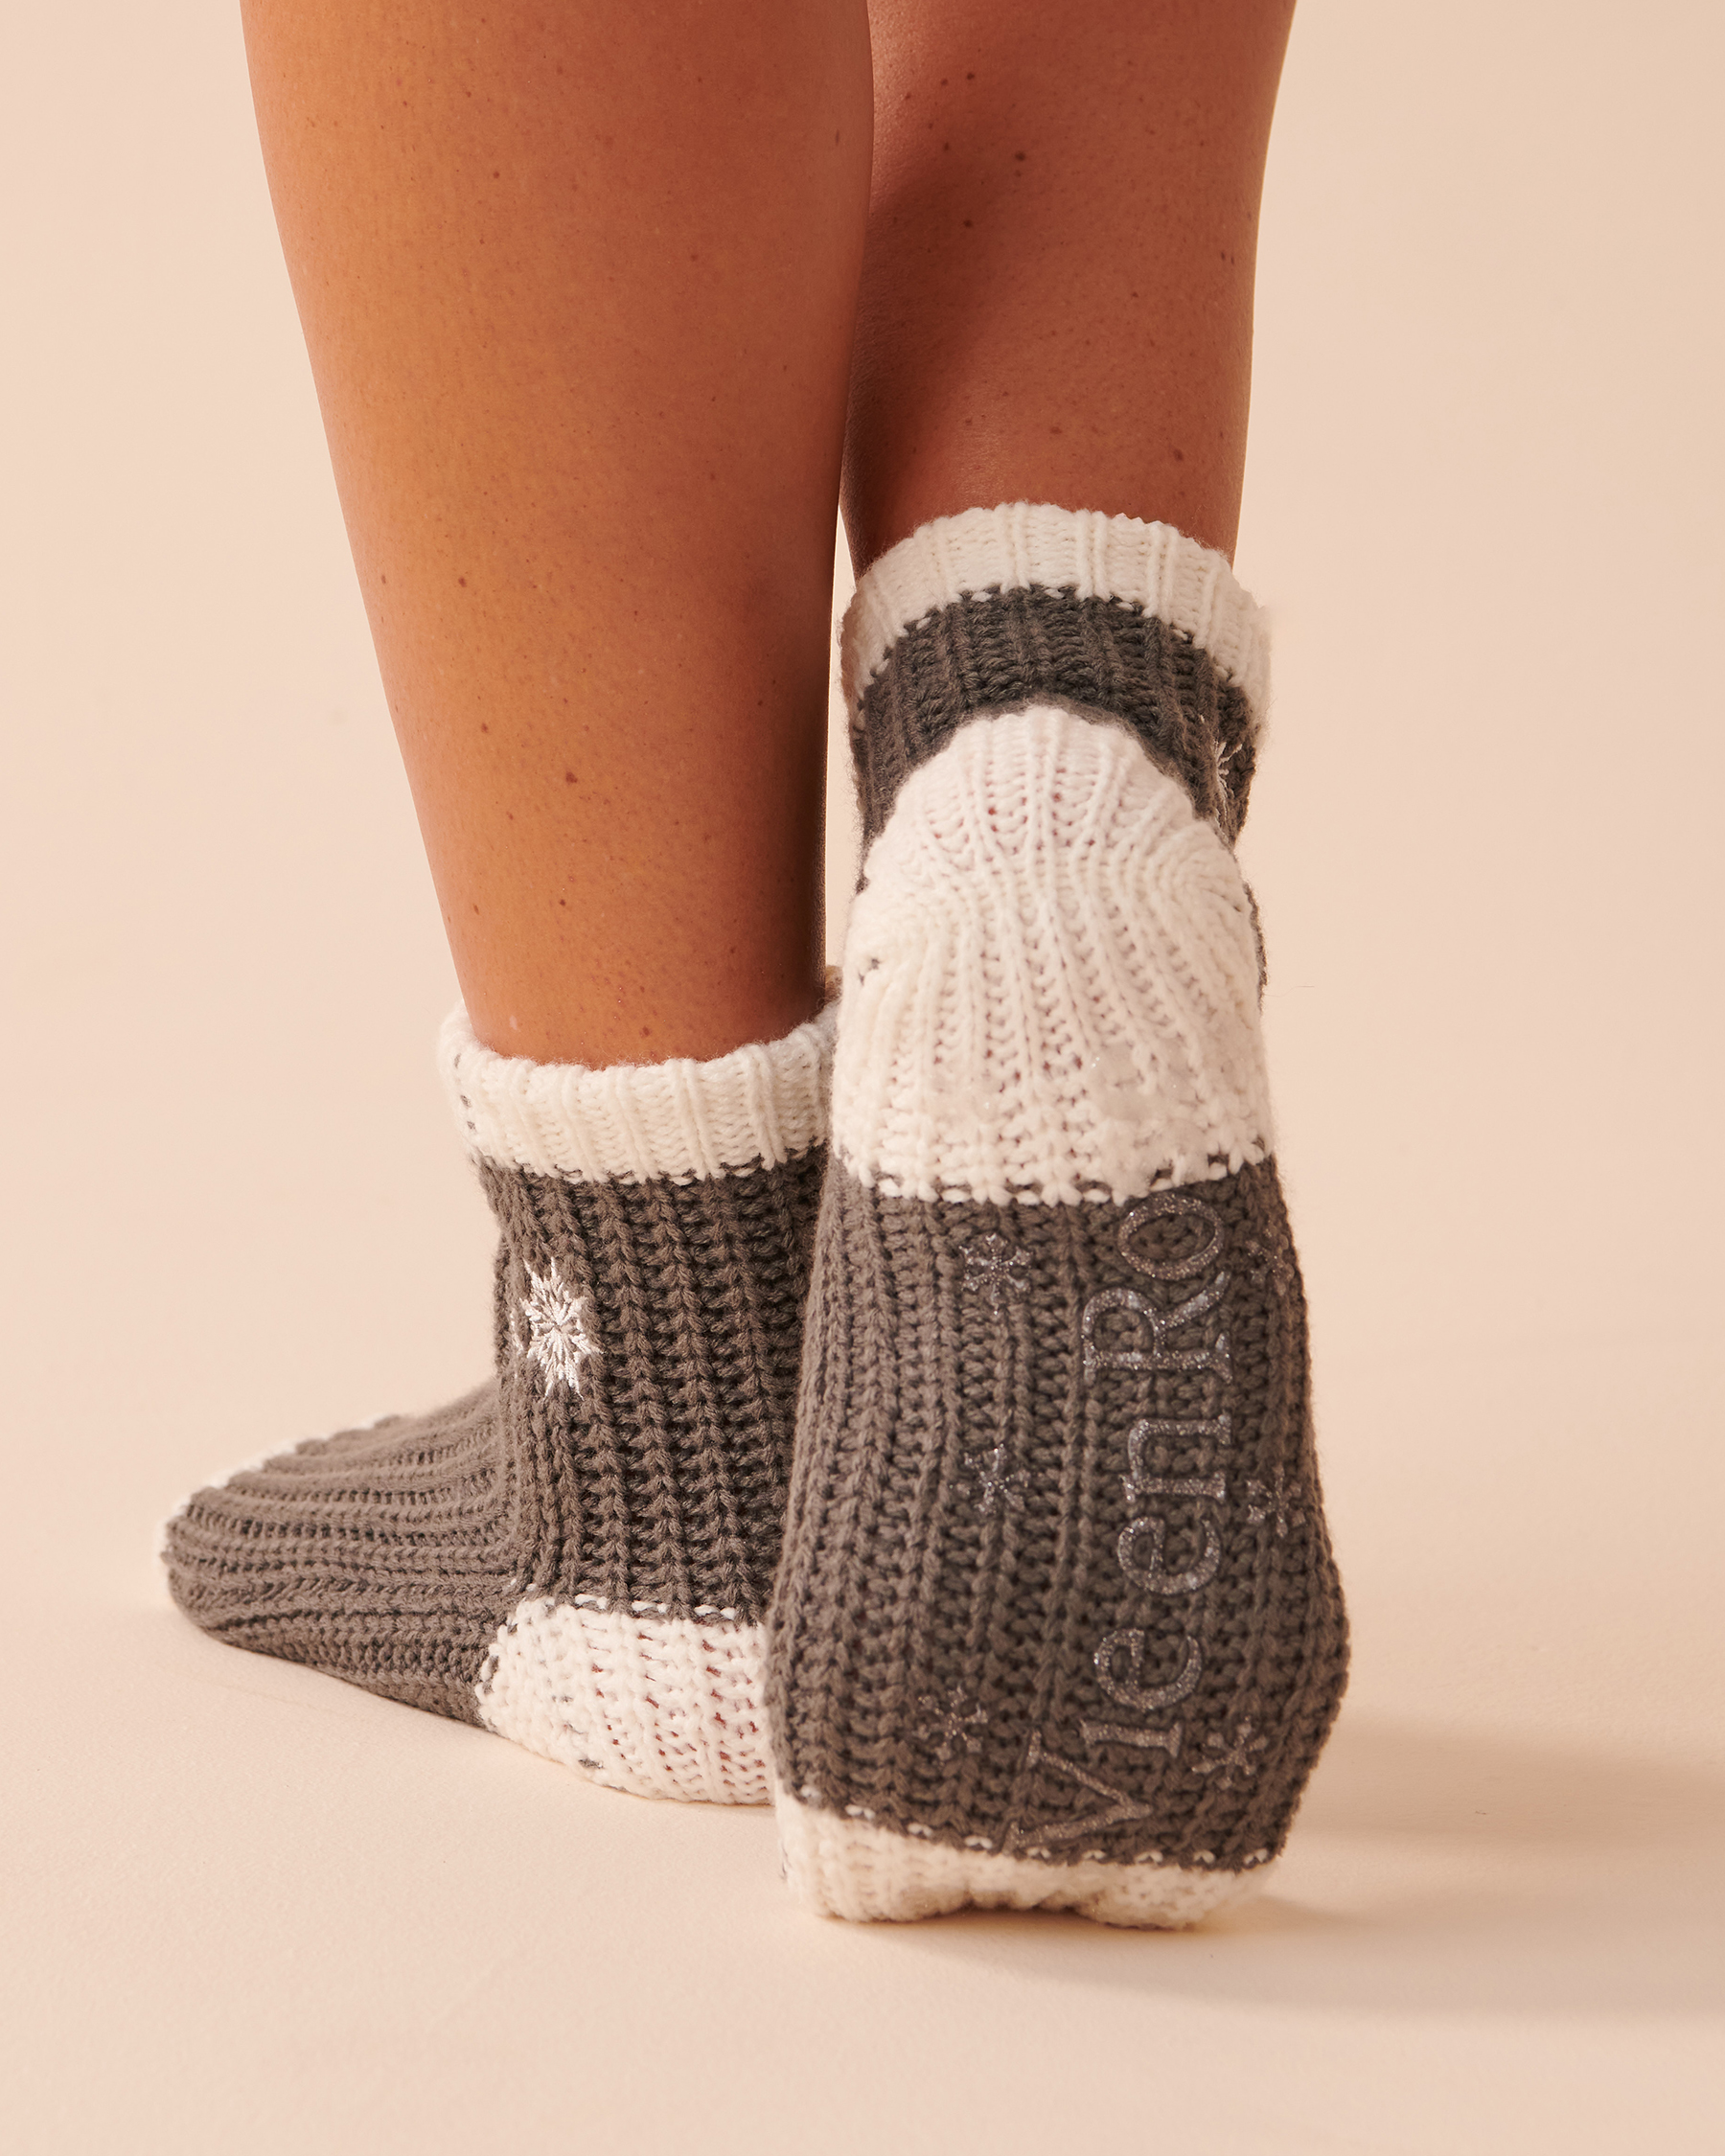 LA VIE EN ROSE Knitted Socks with Winter Embroidery Chimney Smoke 40700295 - View2